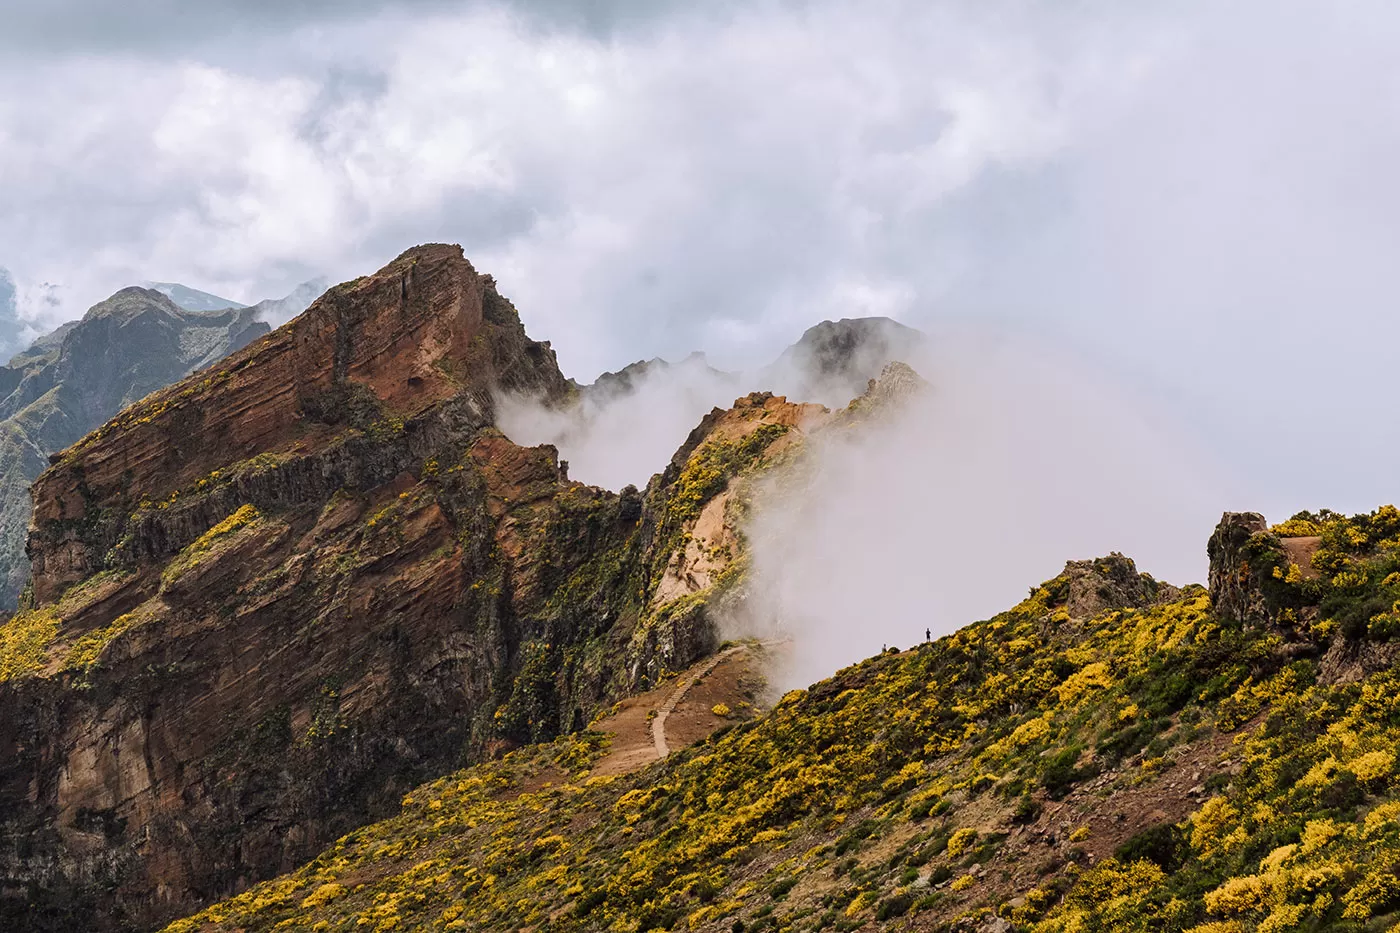 Things to do in Madeira - Pico do Arieiro - Clouds covering side of mountains